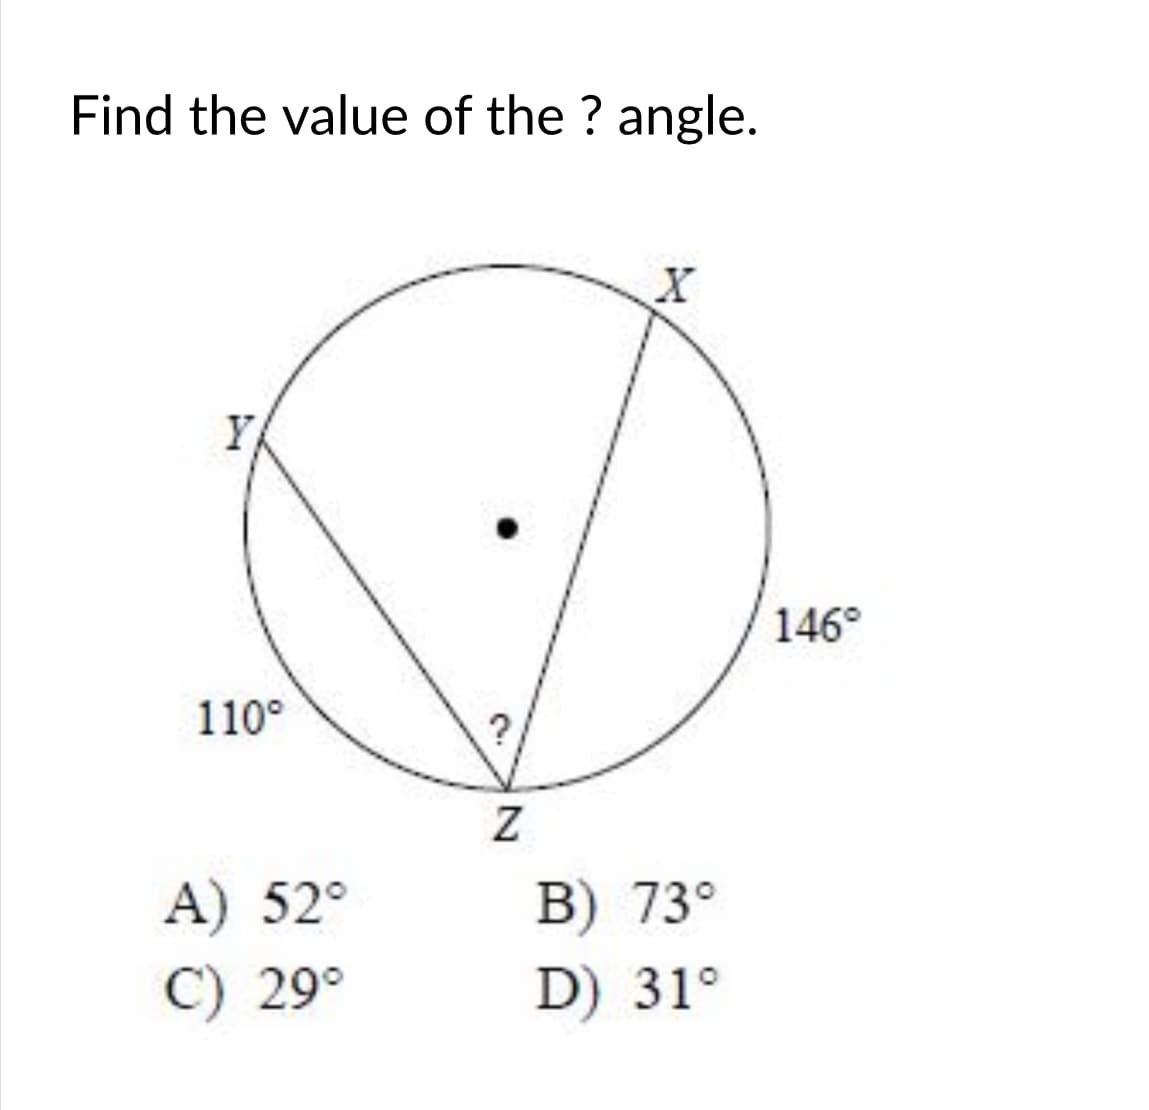 Find the value of the ? angle.
Y
146°
110°
A) 52°
C) 29°
B) 73°
D) 31°
